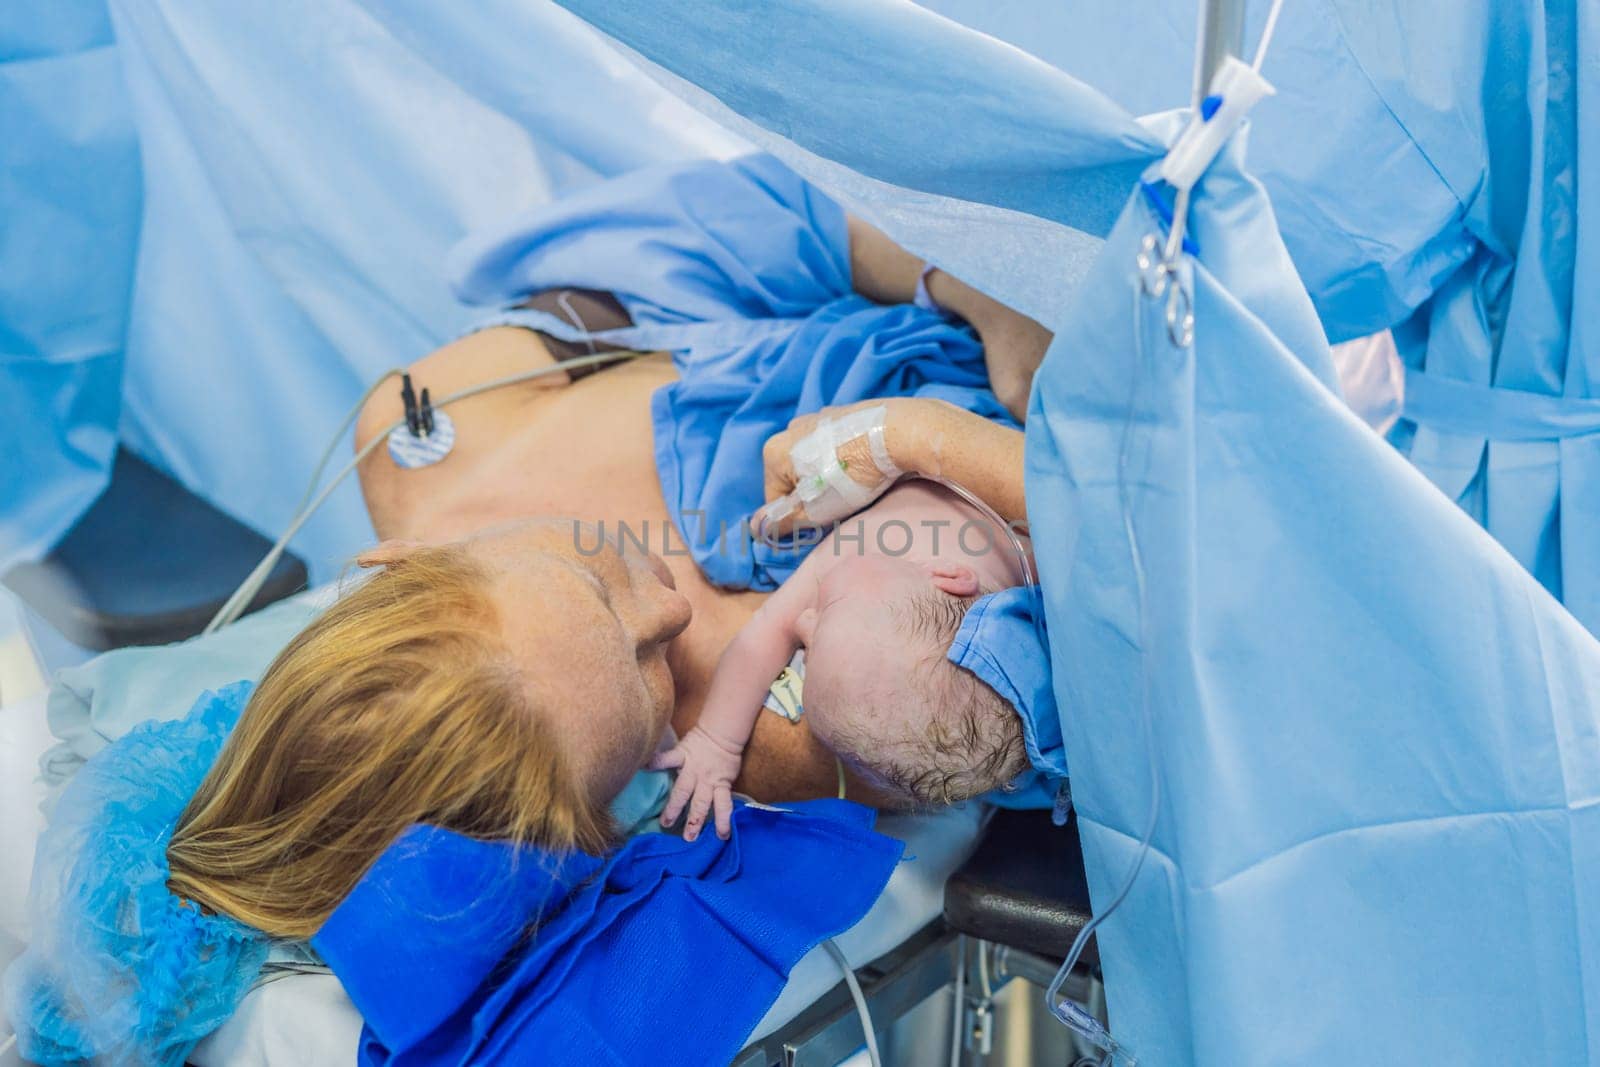 Baby on mother's chest immediately after birth in a hospital. The mother and newborn share a tender moment, emphasizing the bond and emotional connection. The medical staff ensures a safe and caring environment.